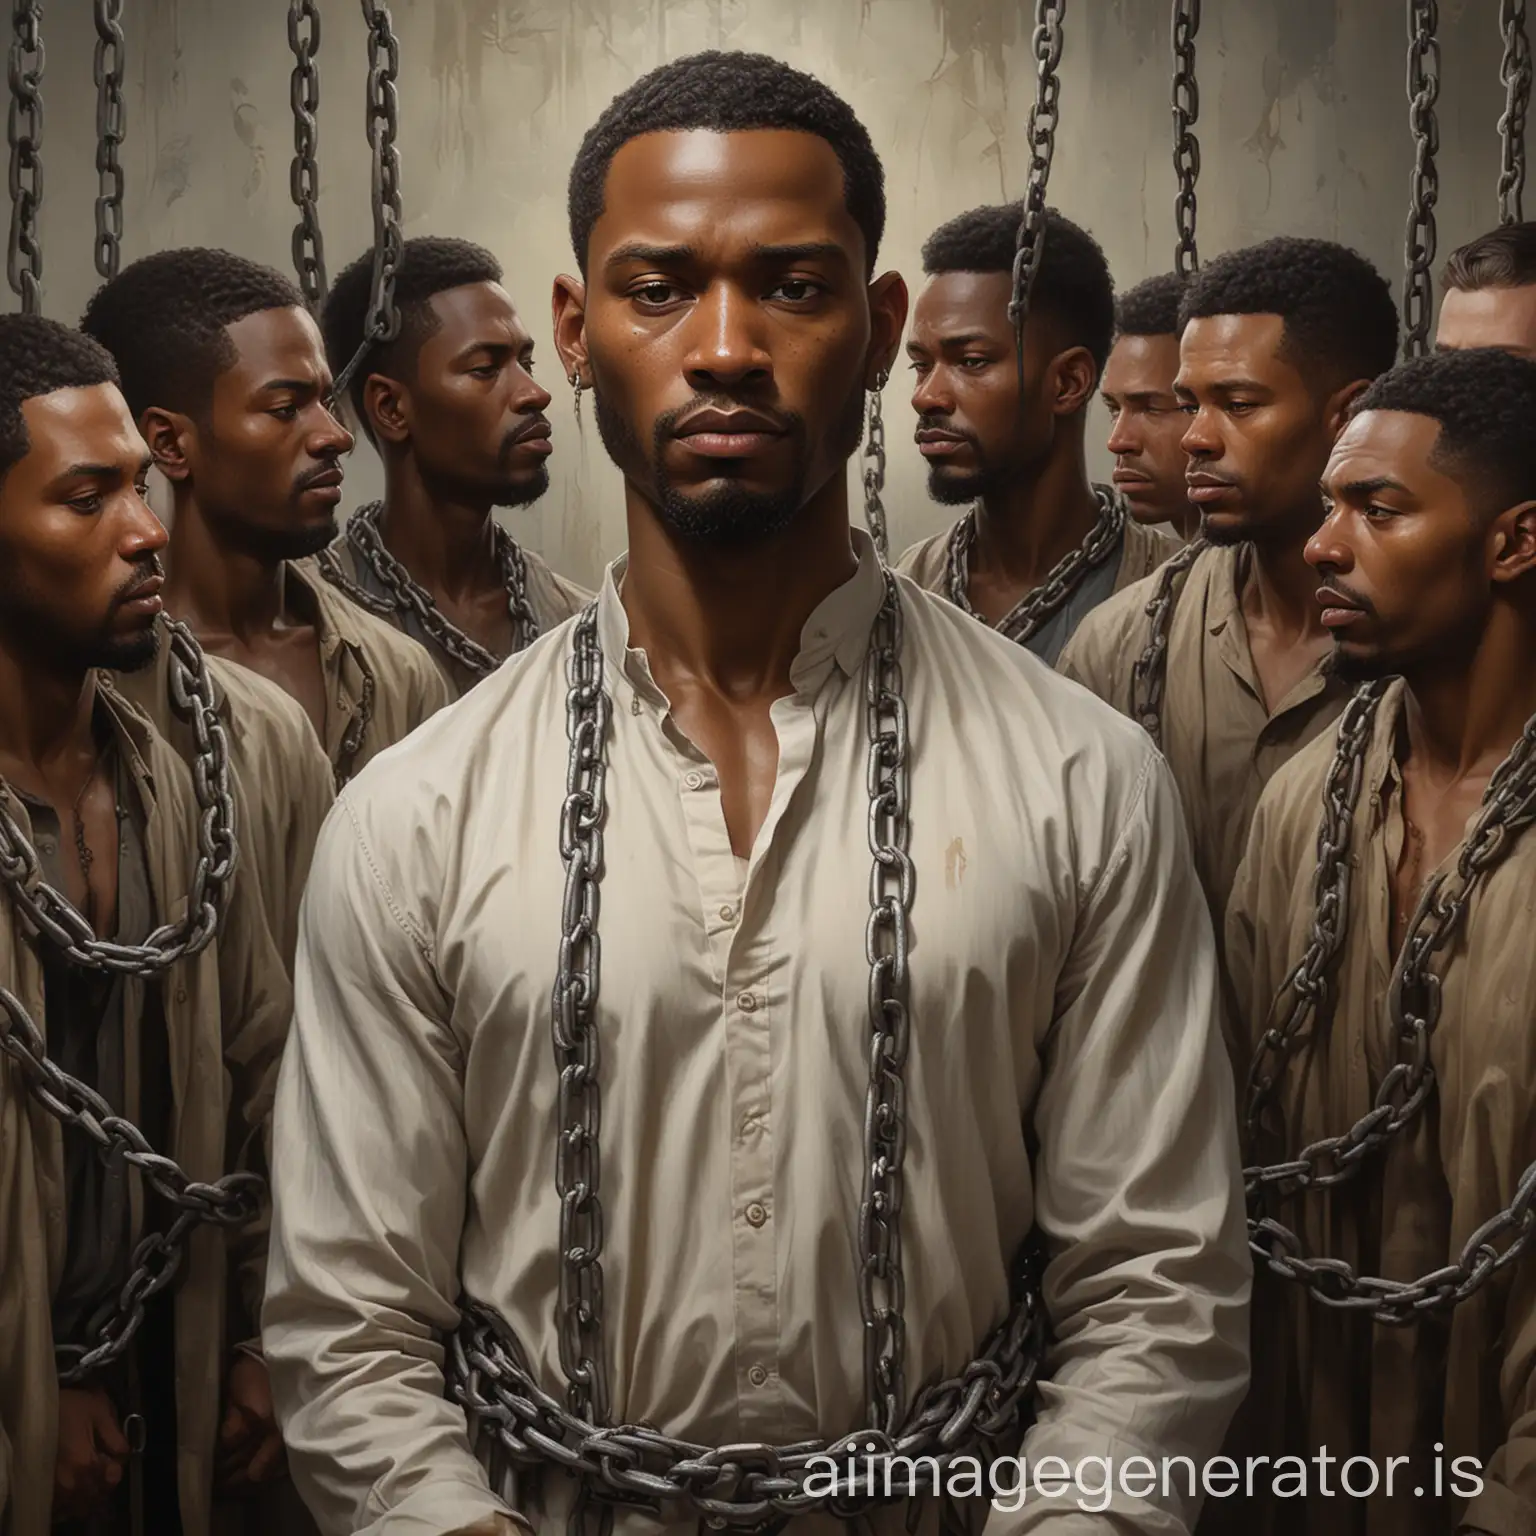 there is a man standing in front of a group of men, artwork by Pedro Bell, a portrait of the character, painting by Android Jones, Rob Rey, Stefan Koidl inspired, dramatic artwork, the man is wrapped in chains, inspired by Kadir Nelson, fan art by Jason Benjamin, slave by Galen Dara, featured art, background artwork